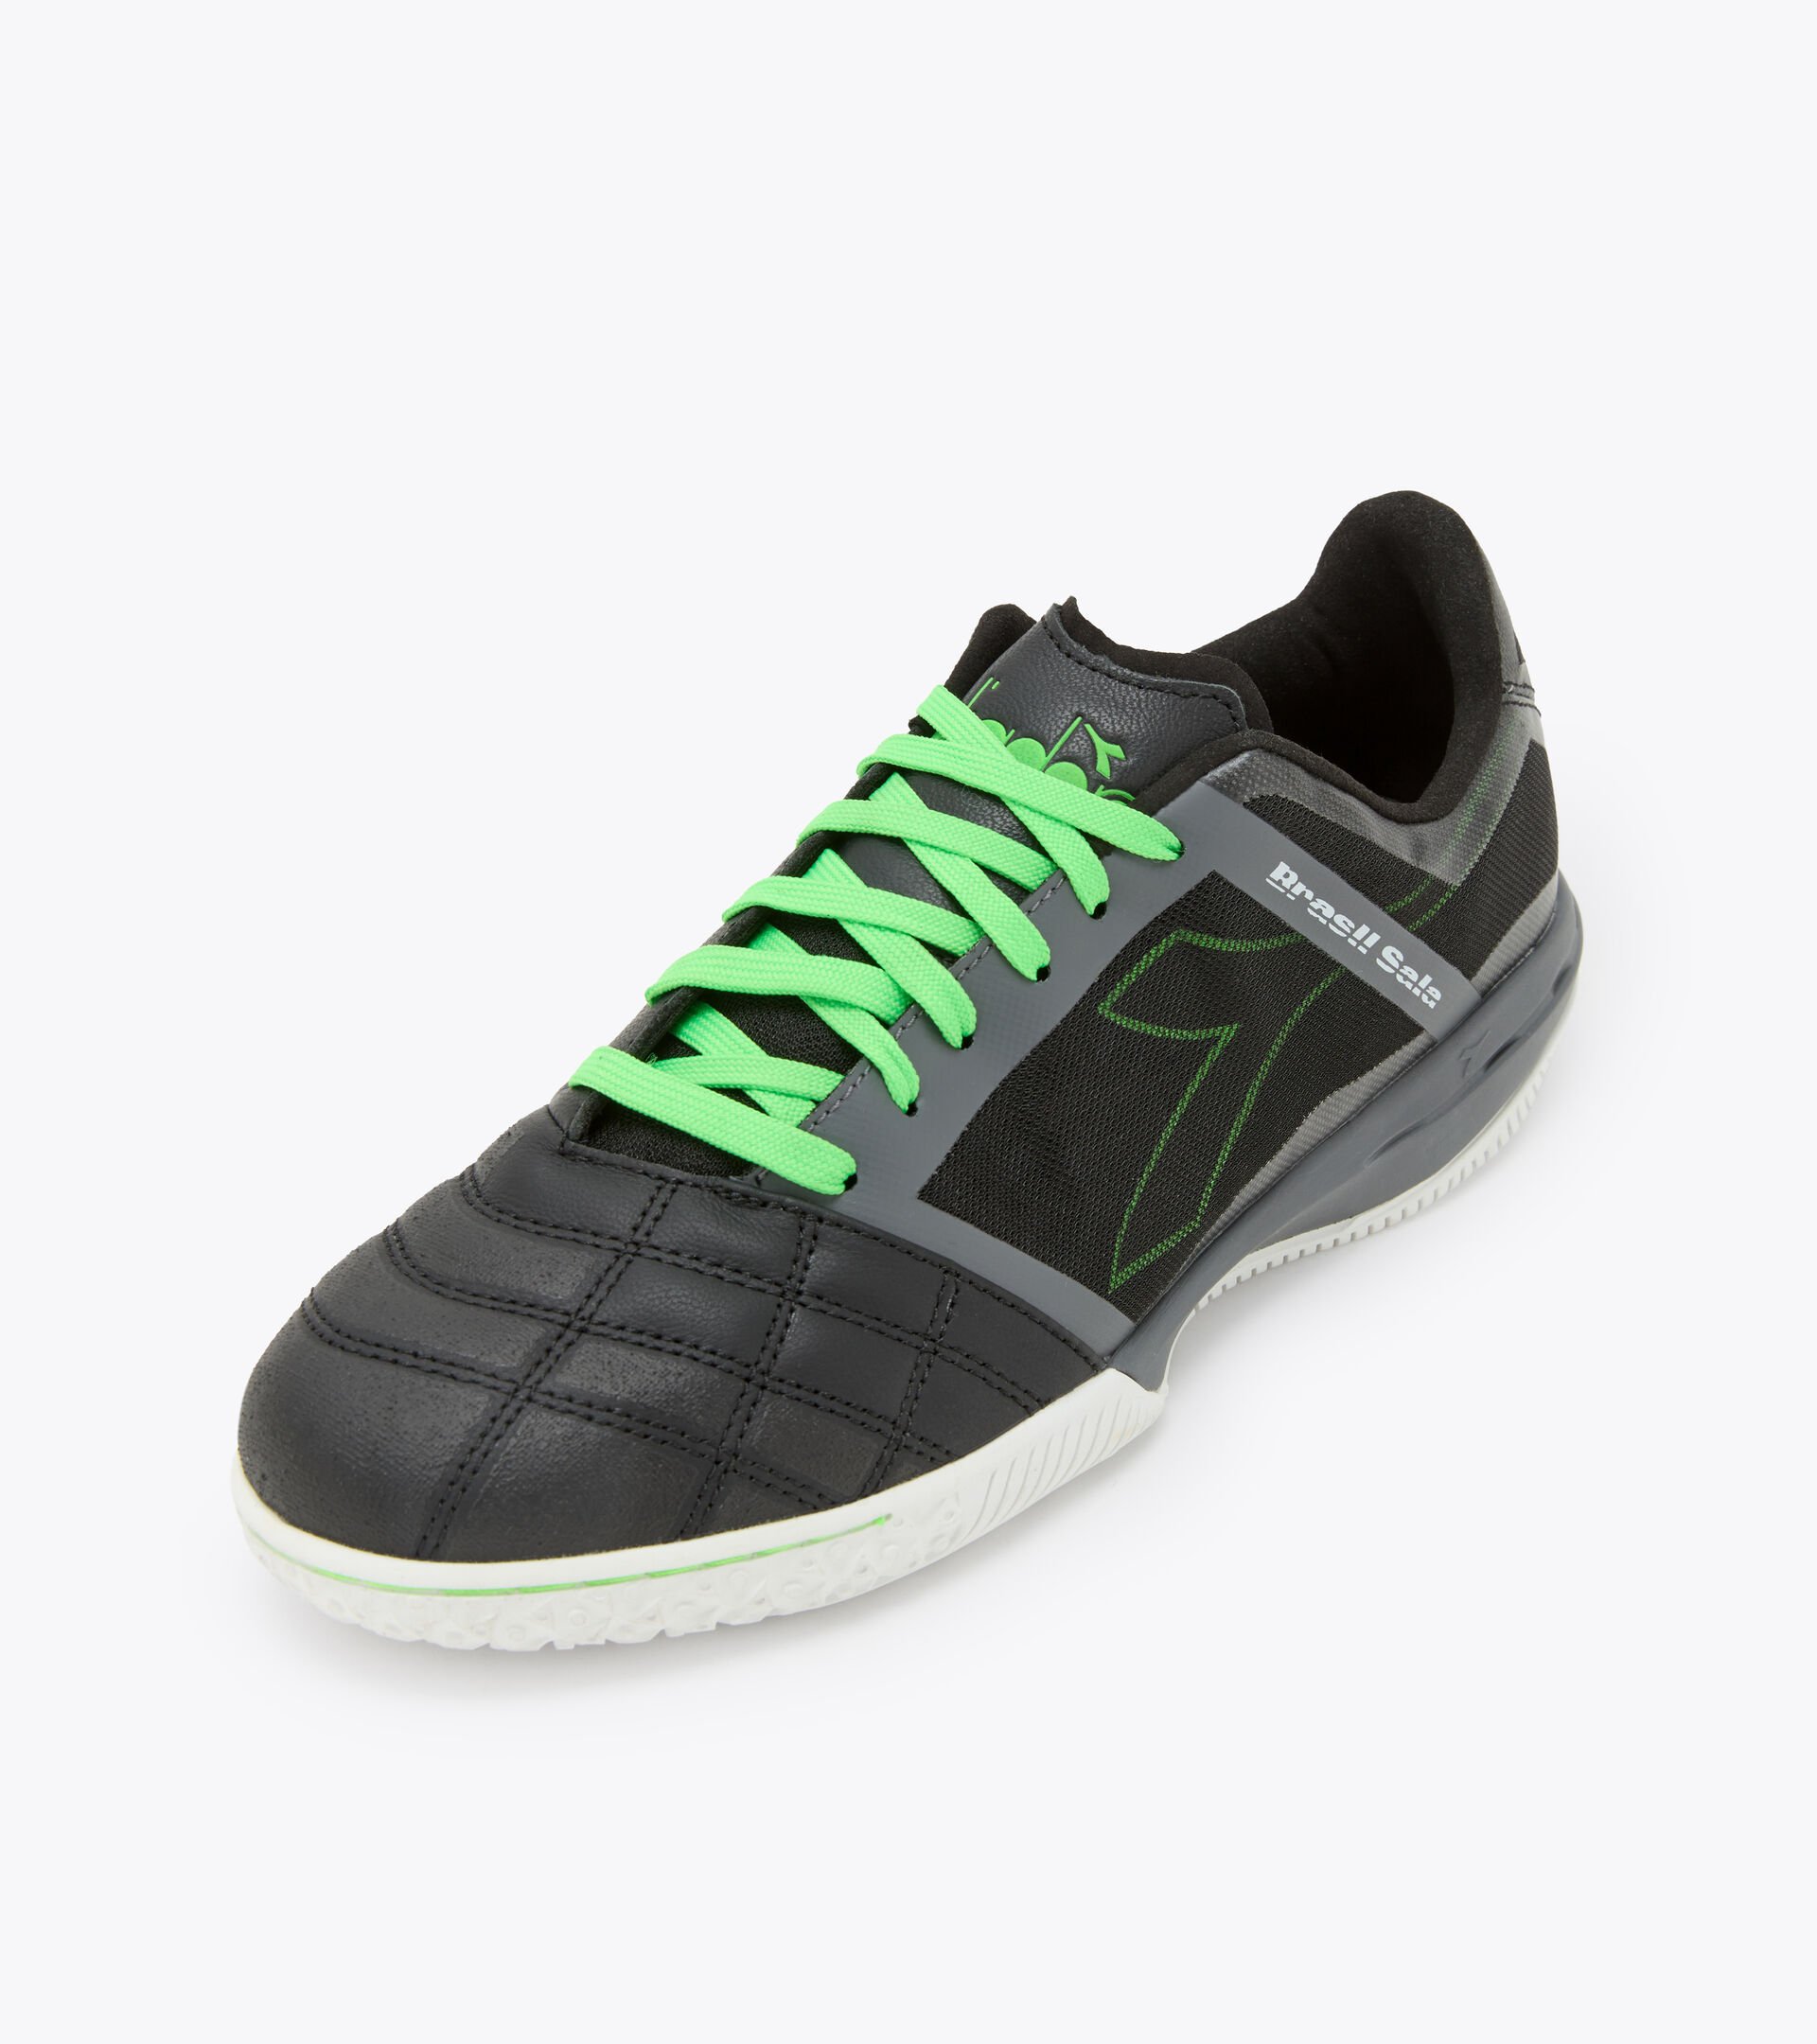 Futsal boot - Specific outsole for indoor grounds BRASIL SALA ID BLACK/GREEN FLUO - Diadora